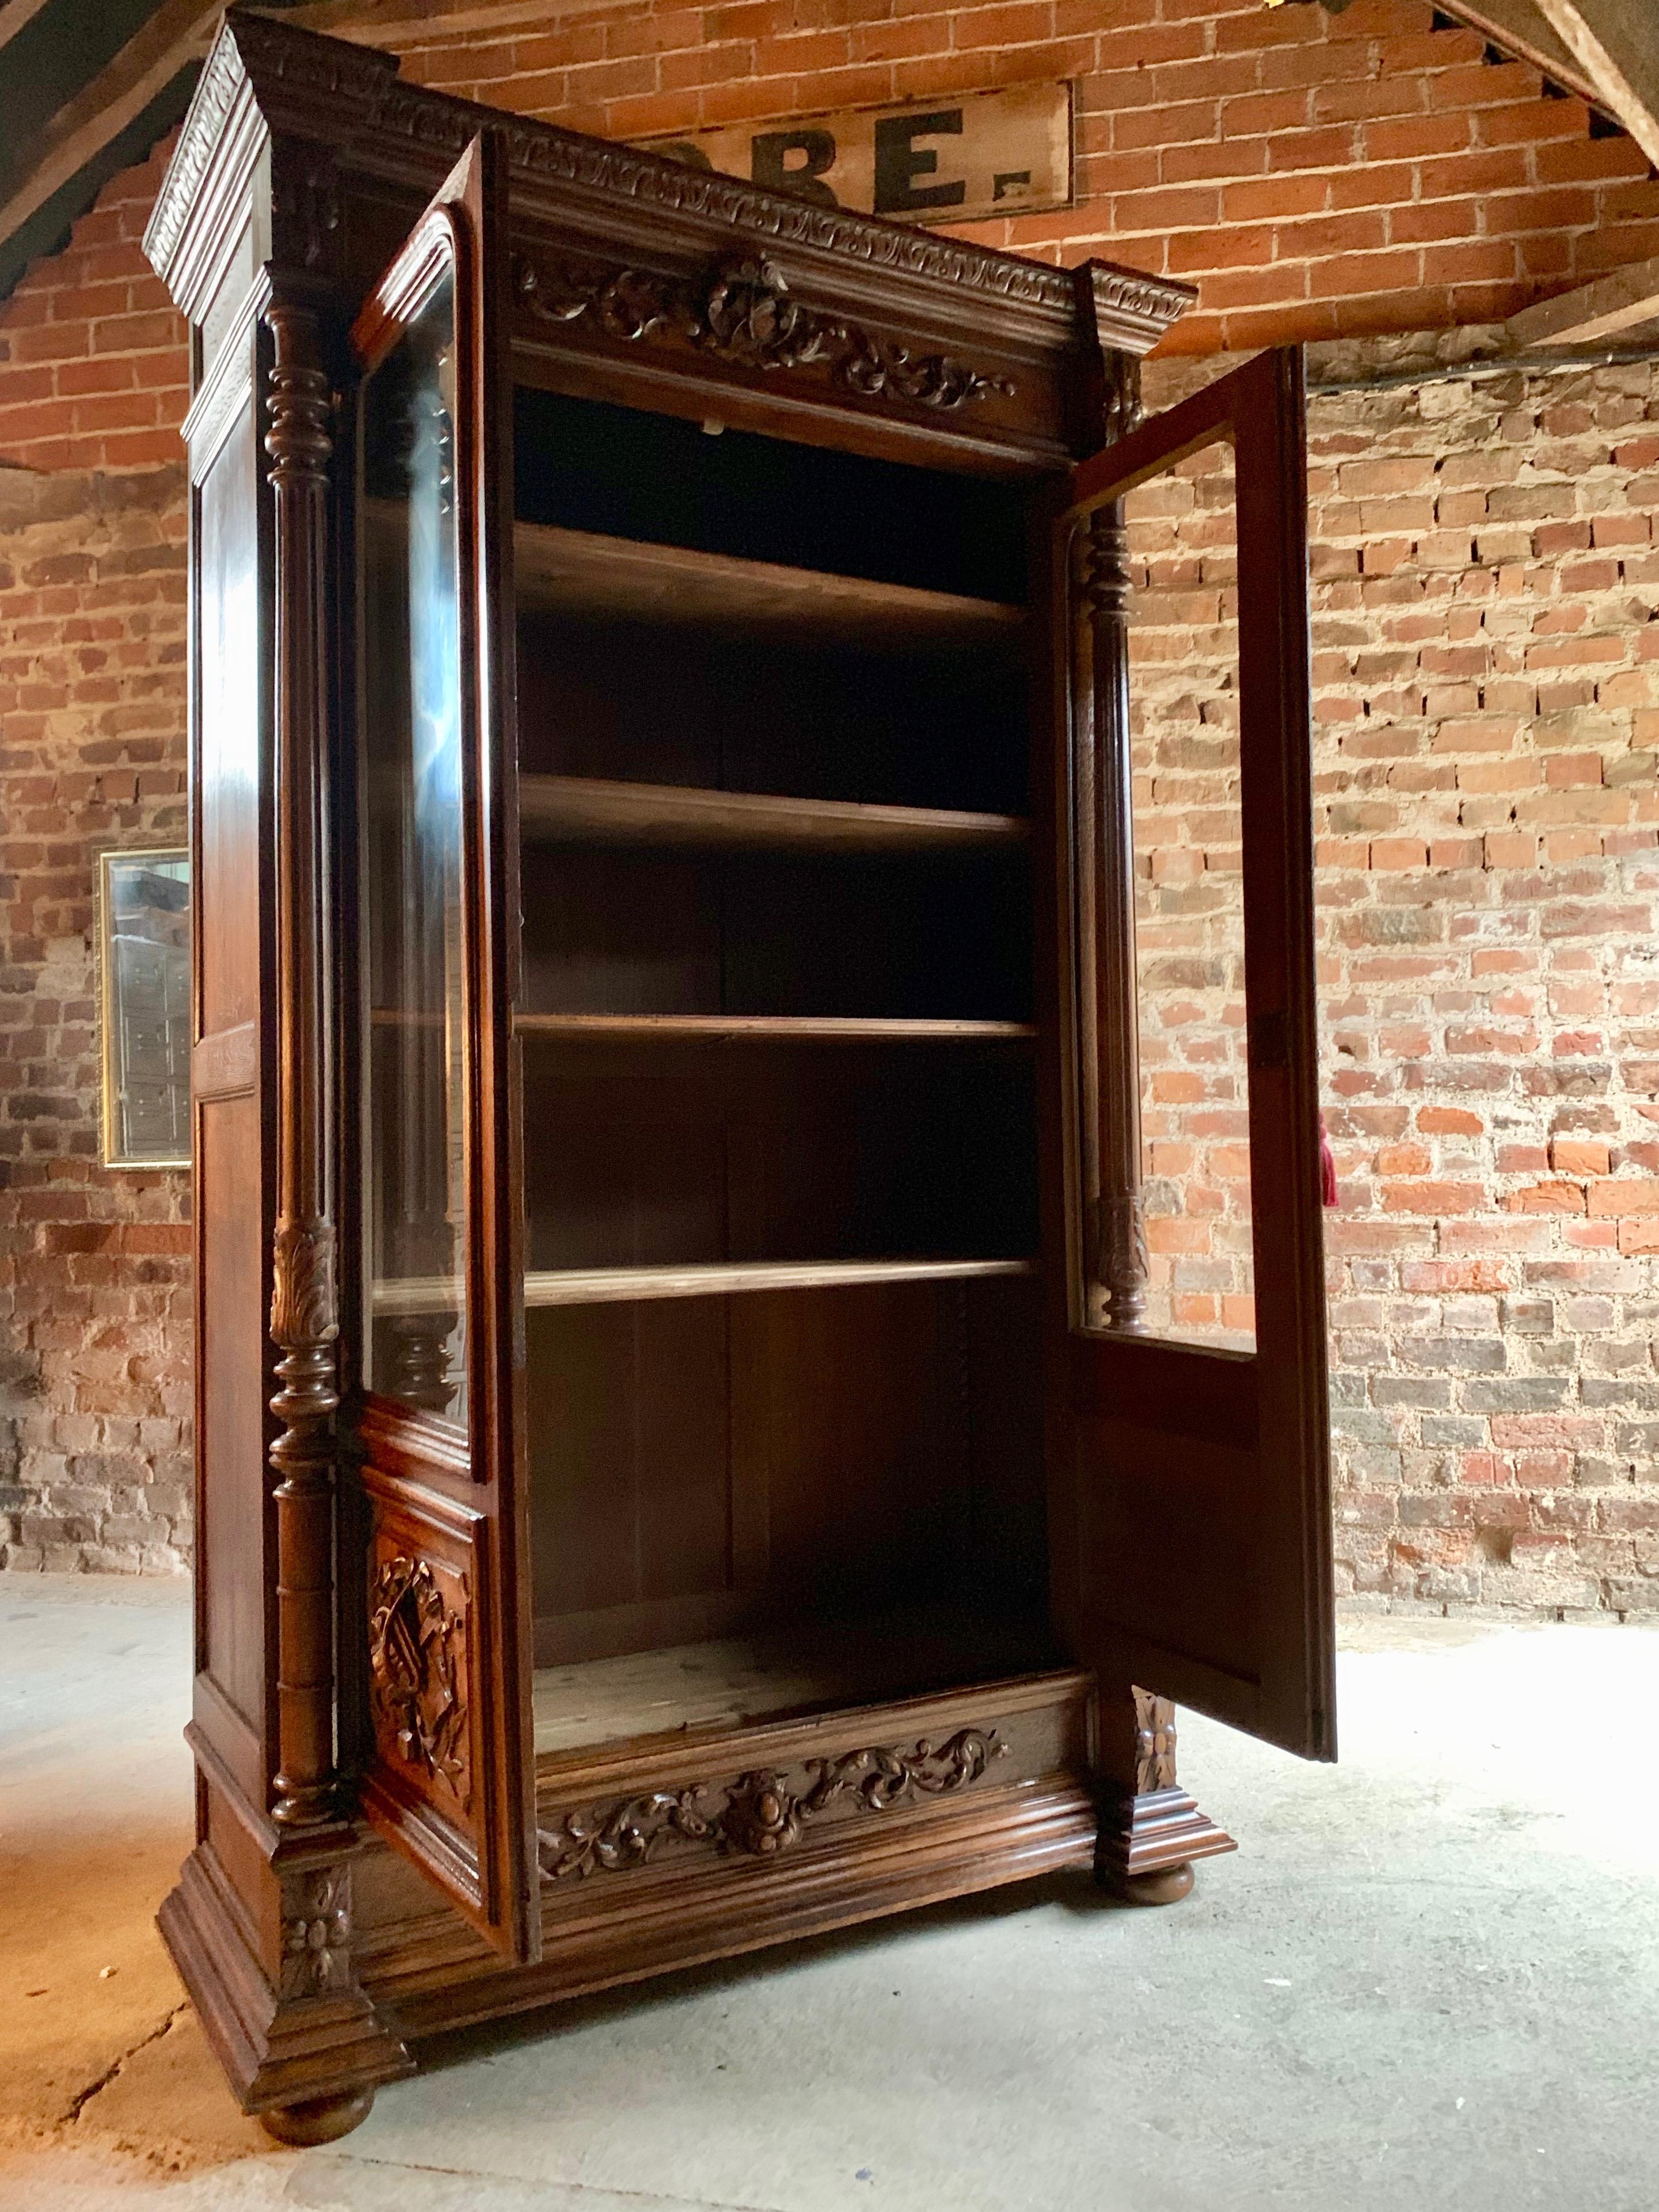 Late 19th Century Antique French Bookcase Vitrine Heavily Carved Solid Oak 19th Century circa 1890